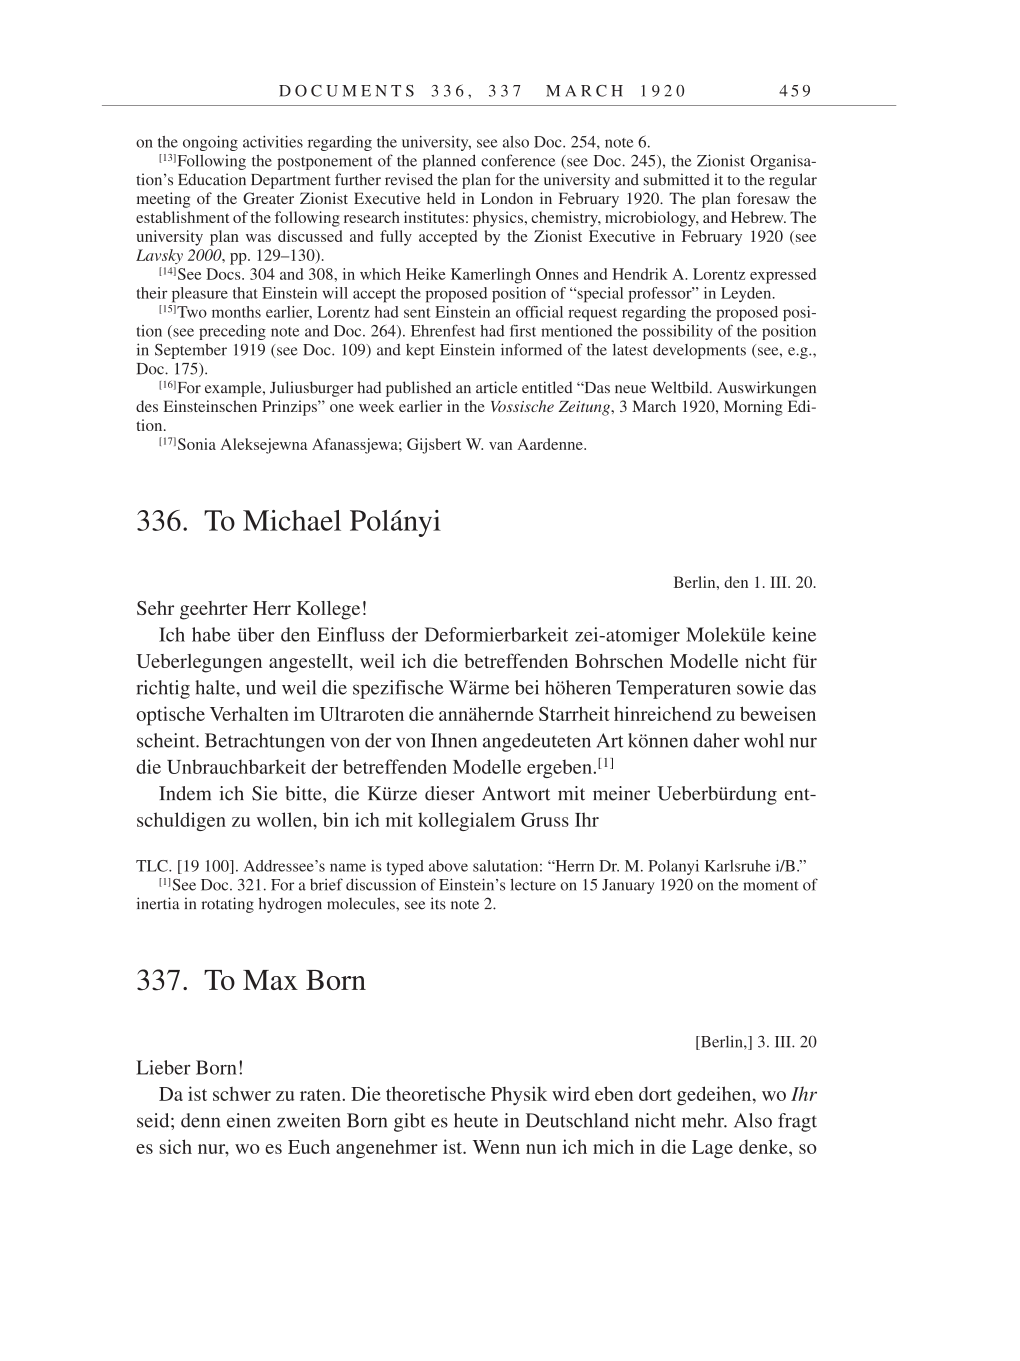 Volume 9: The Berlin Years: Correspondence January 1919-April 1920 page 459